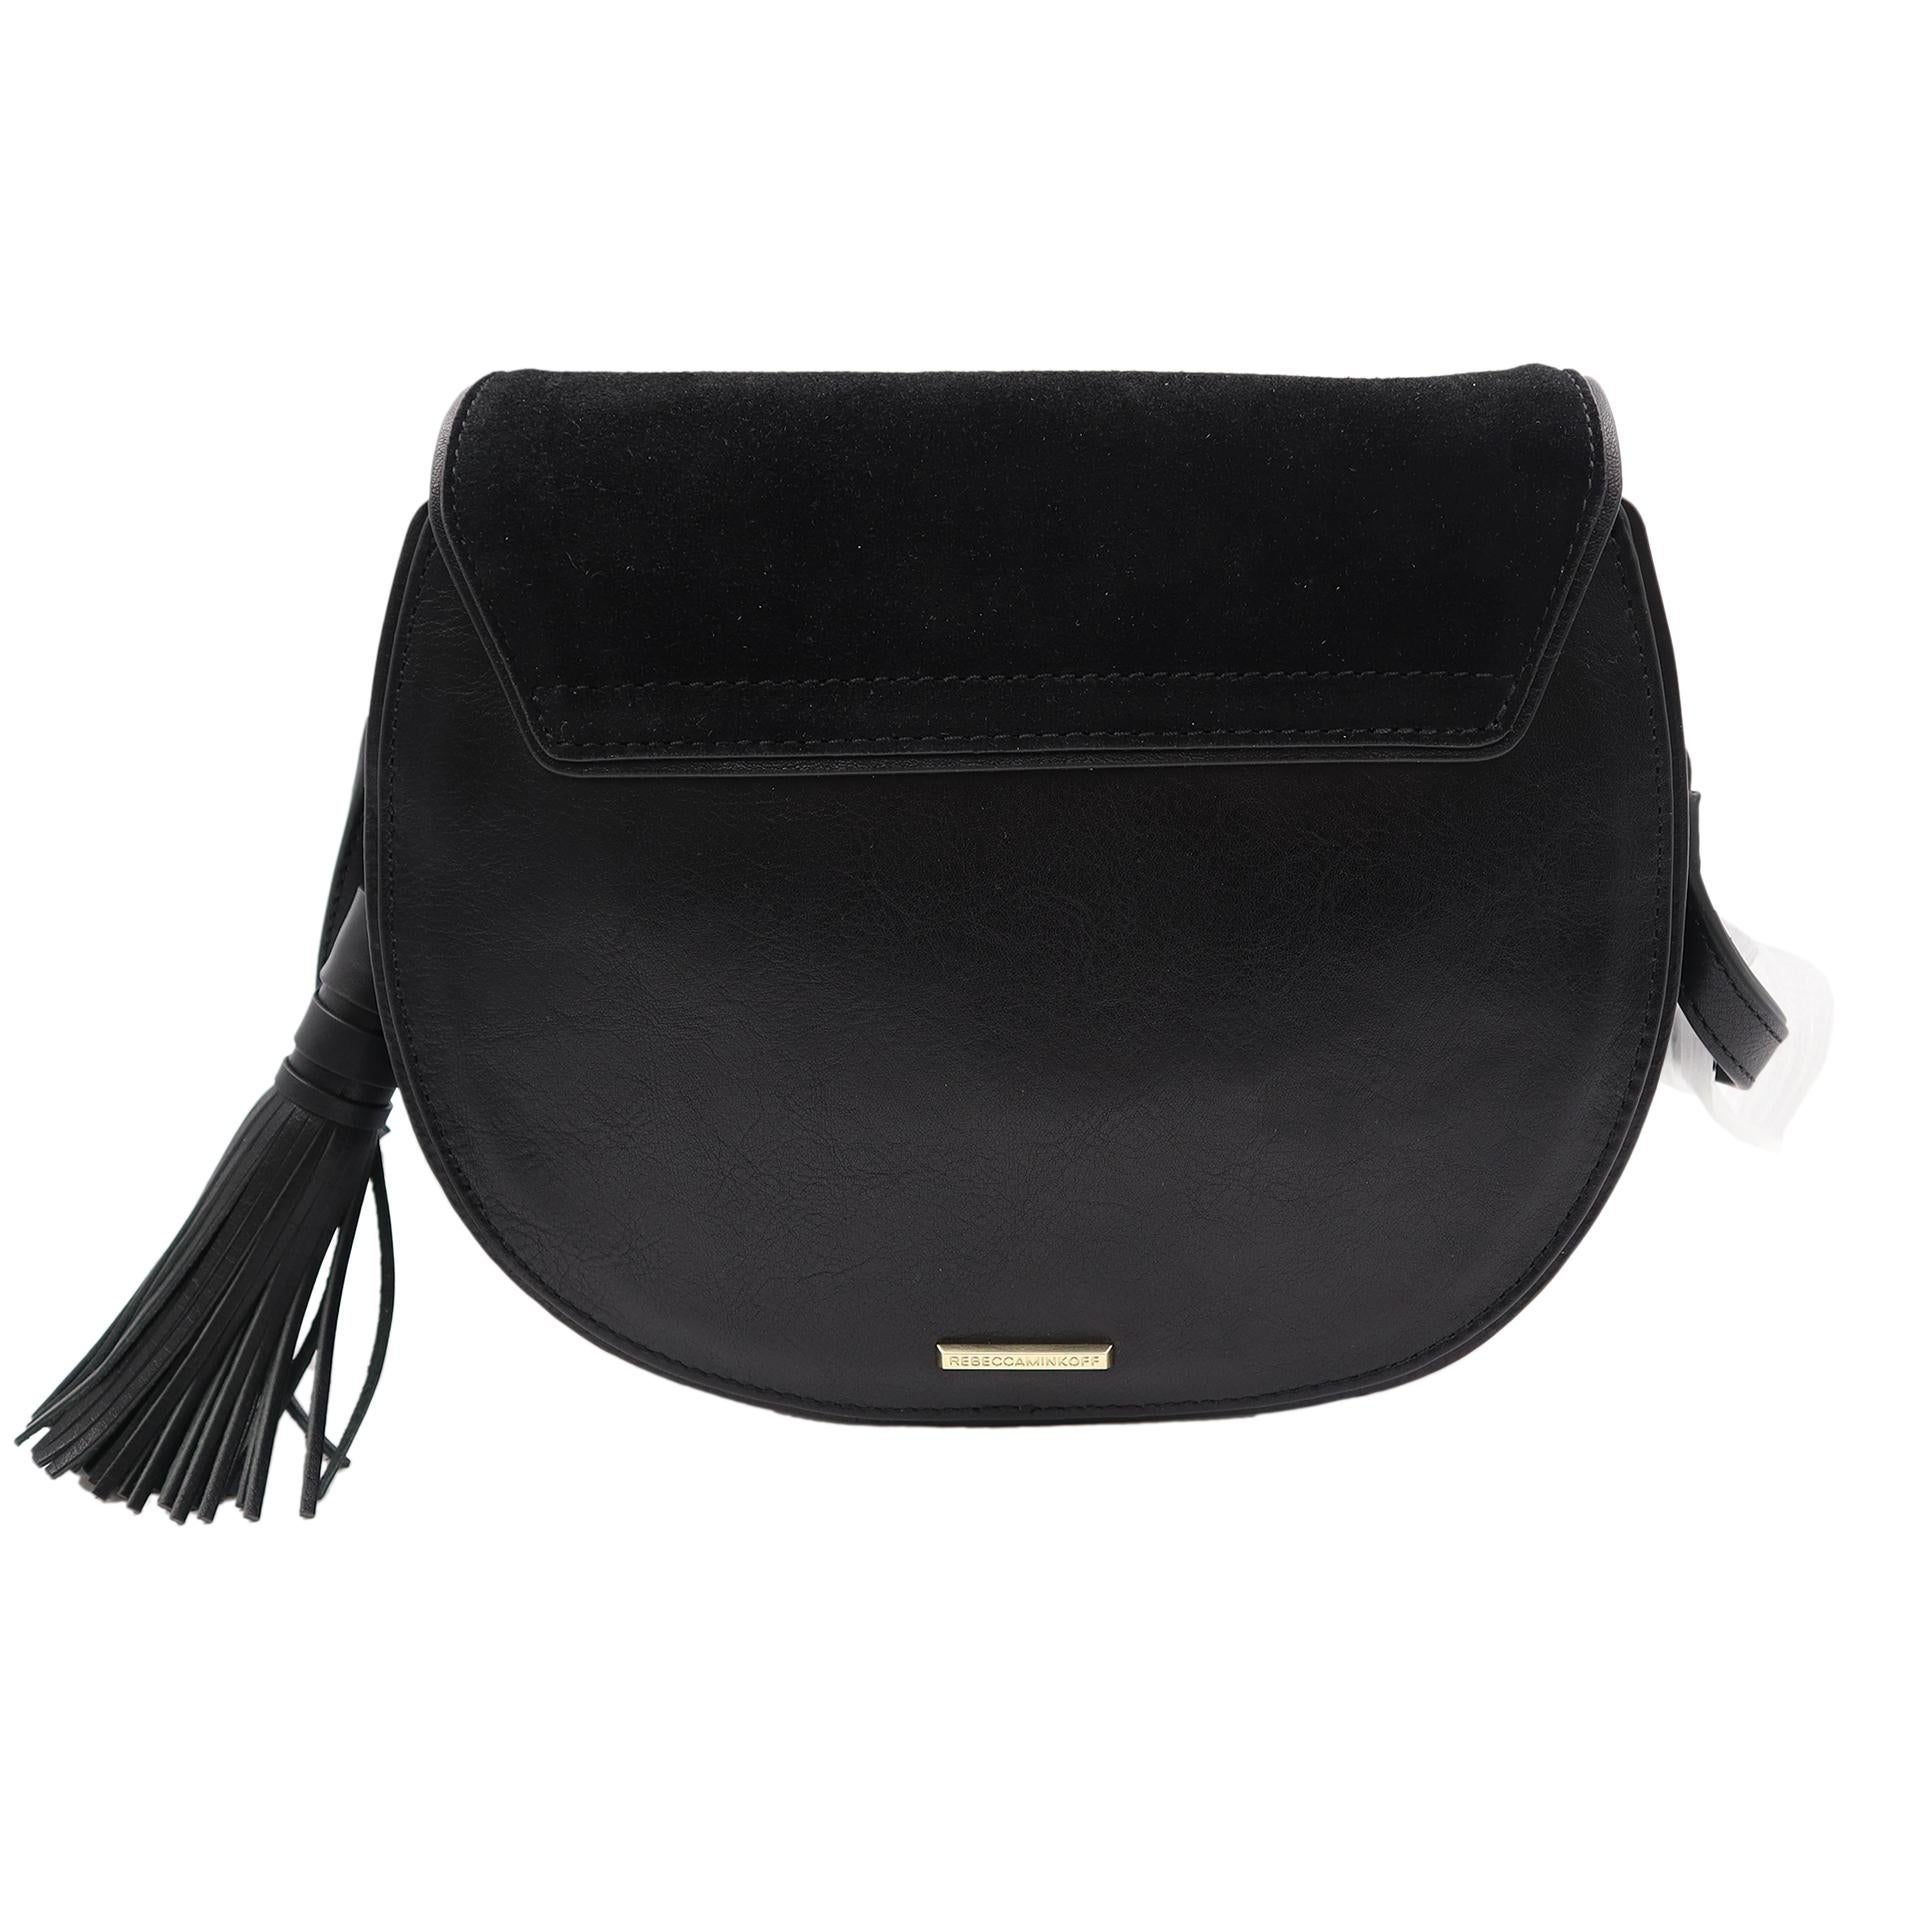 Magnetic snap-closure flap.Optional, adjustable crossbody strap. Interior wall pockets.100% Cowhide Leather. Measurements: Height: 8 inch, Length: 9.5 inch, Depth: 2.5 inch. Strap Drop: 16 inch.	
Brand: Rebecca Minkoff
Condition: New
Hardware Color: